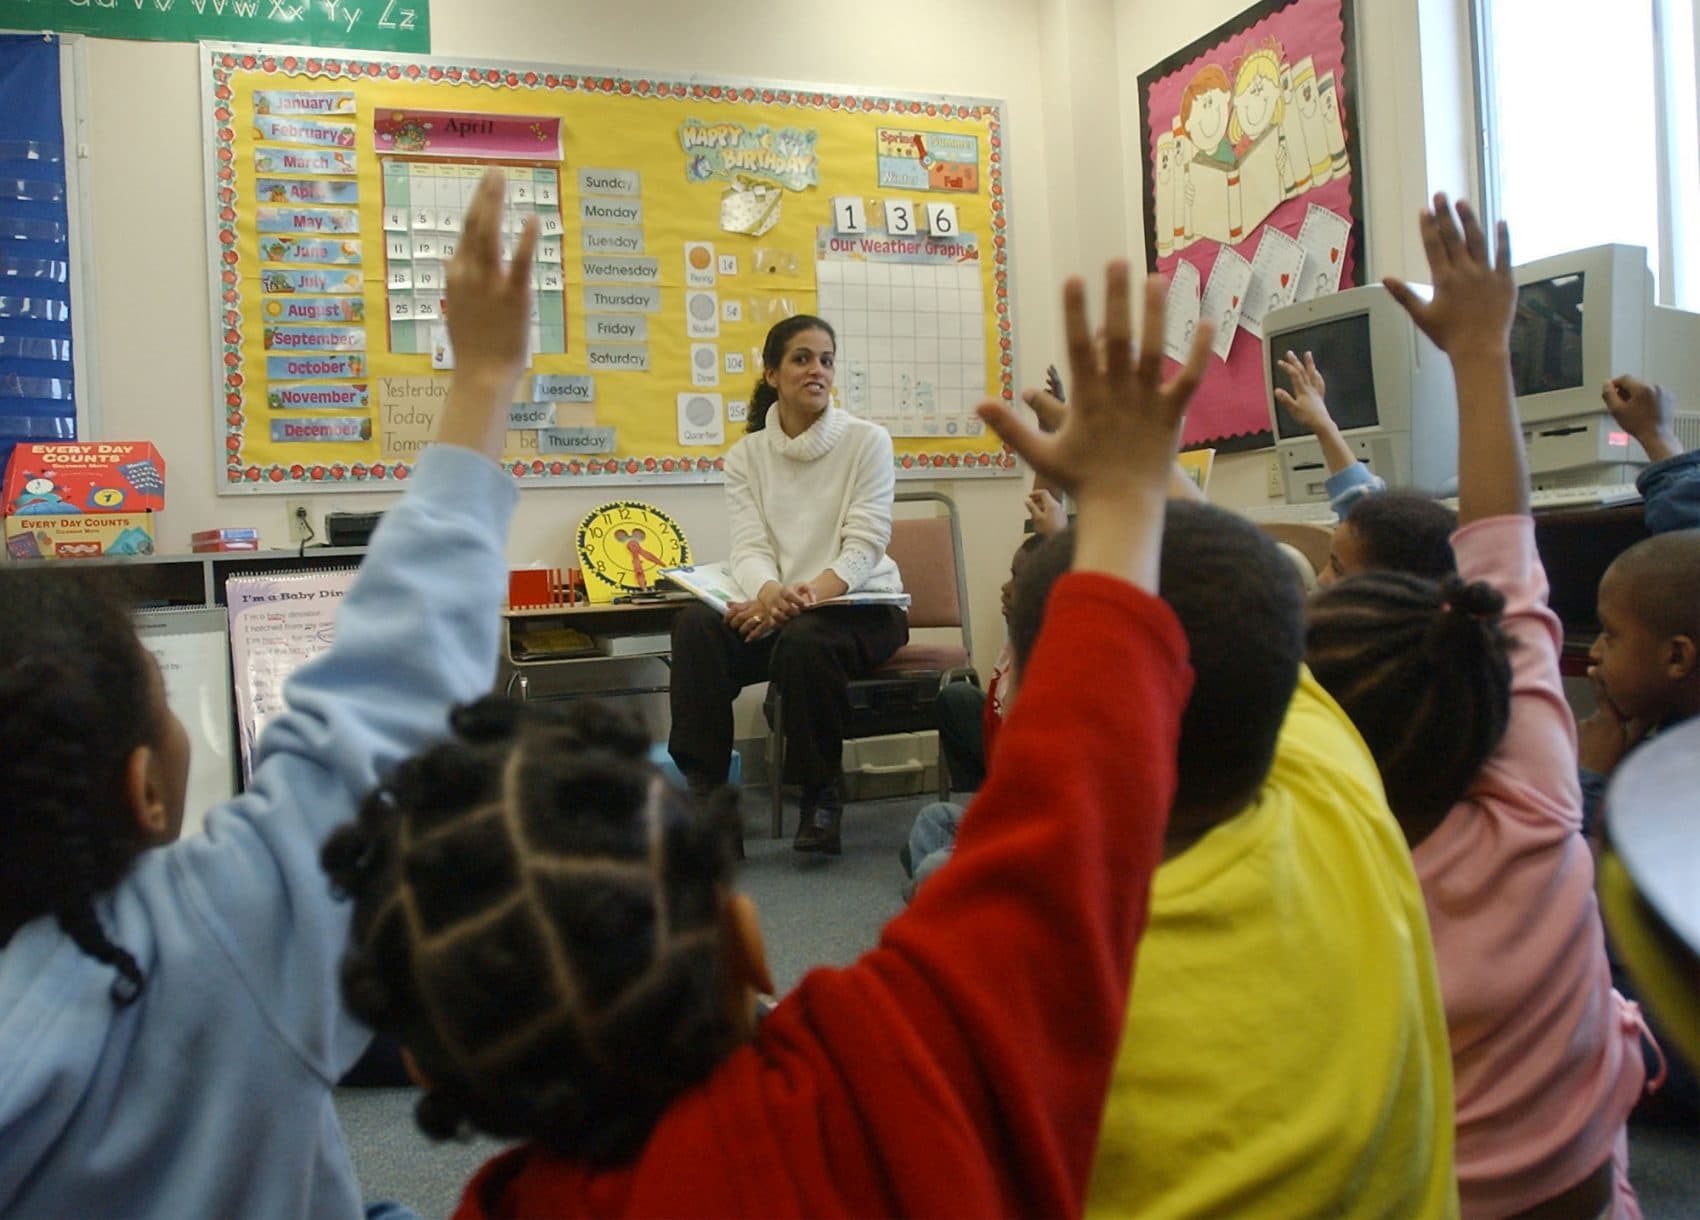 A Brockton elementary school class is seen in 2004. Years before, in the 1990s, students in Brockton and 15 other cities and towns sued the state, arguing that it was failing to provide students the opportunity to receive an &quot;adequate education&quot; and so was violating the Massachusetts Constitution. (Chitose Suzuki/AP)